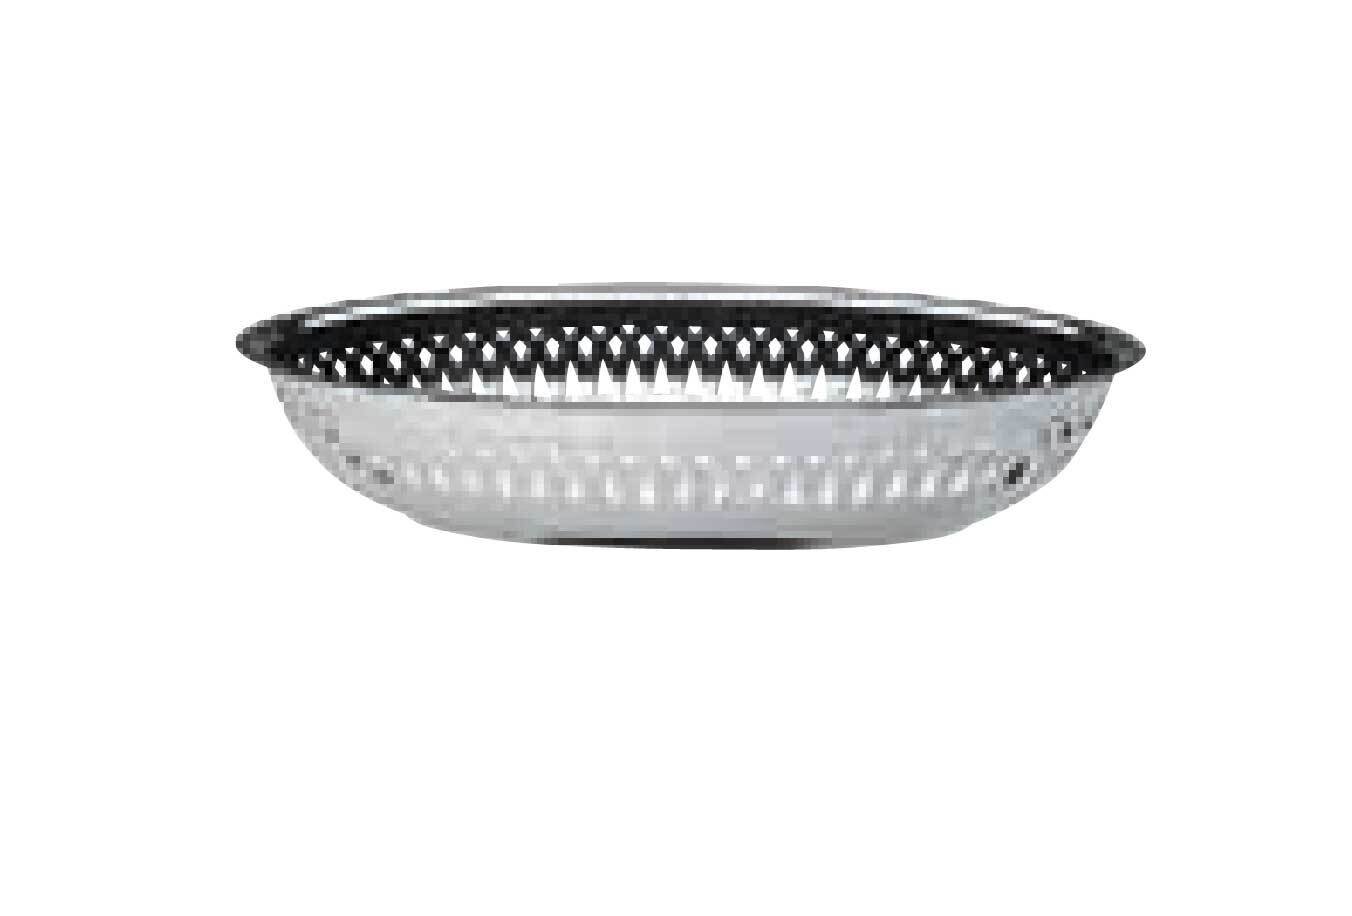 Ercuis Regards Oval Bread Or Fruit Basket 2 Inch Silver Plated F521261-23